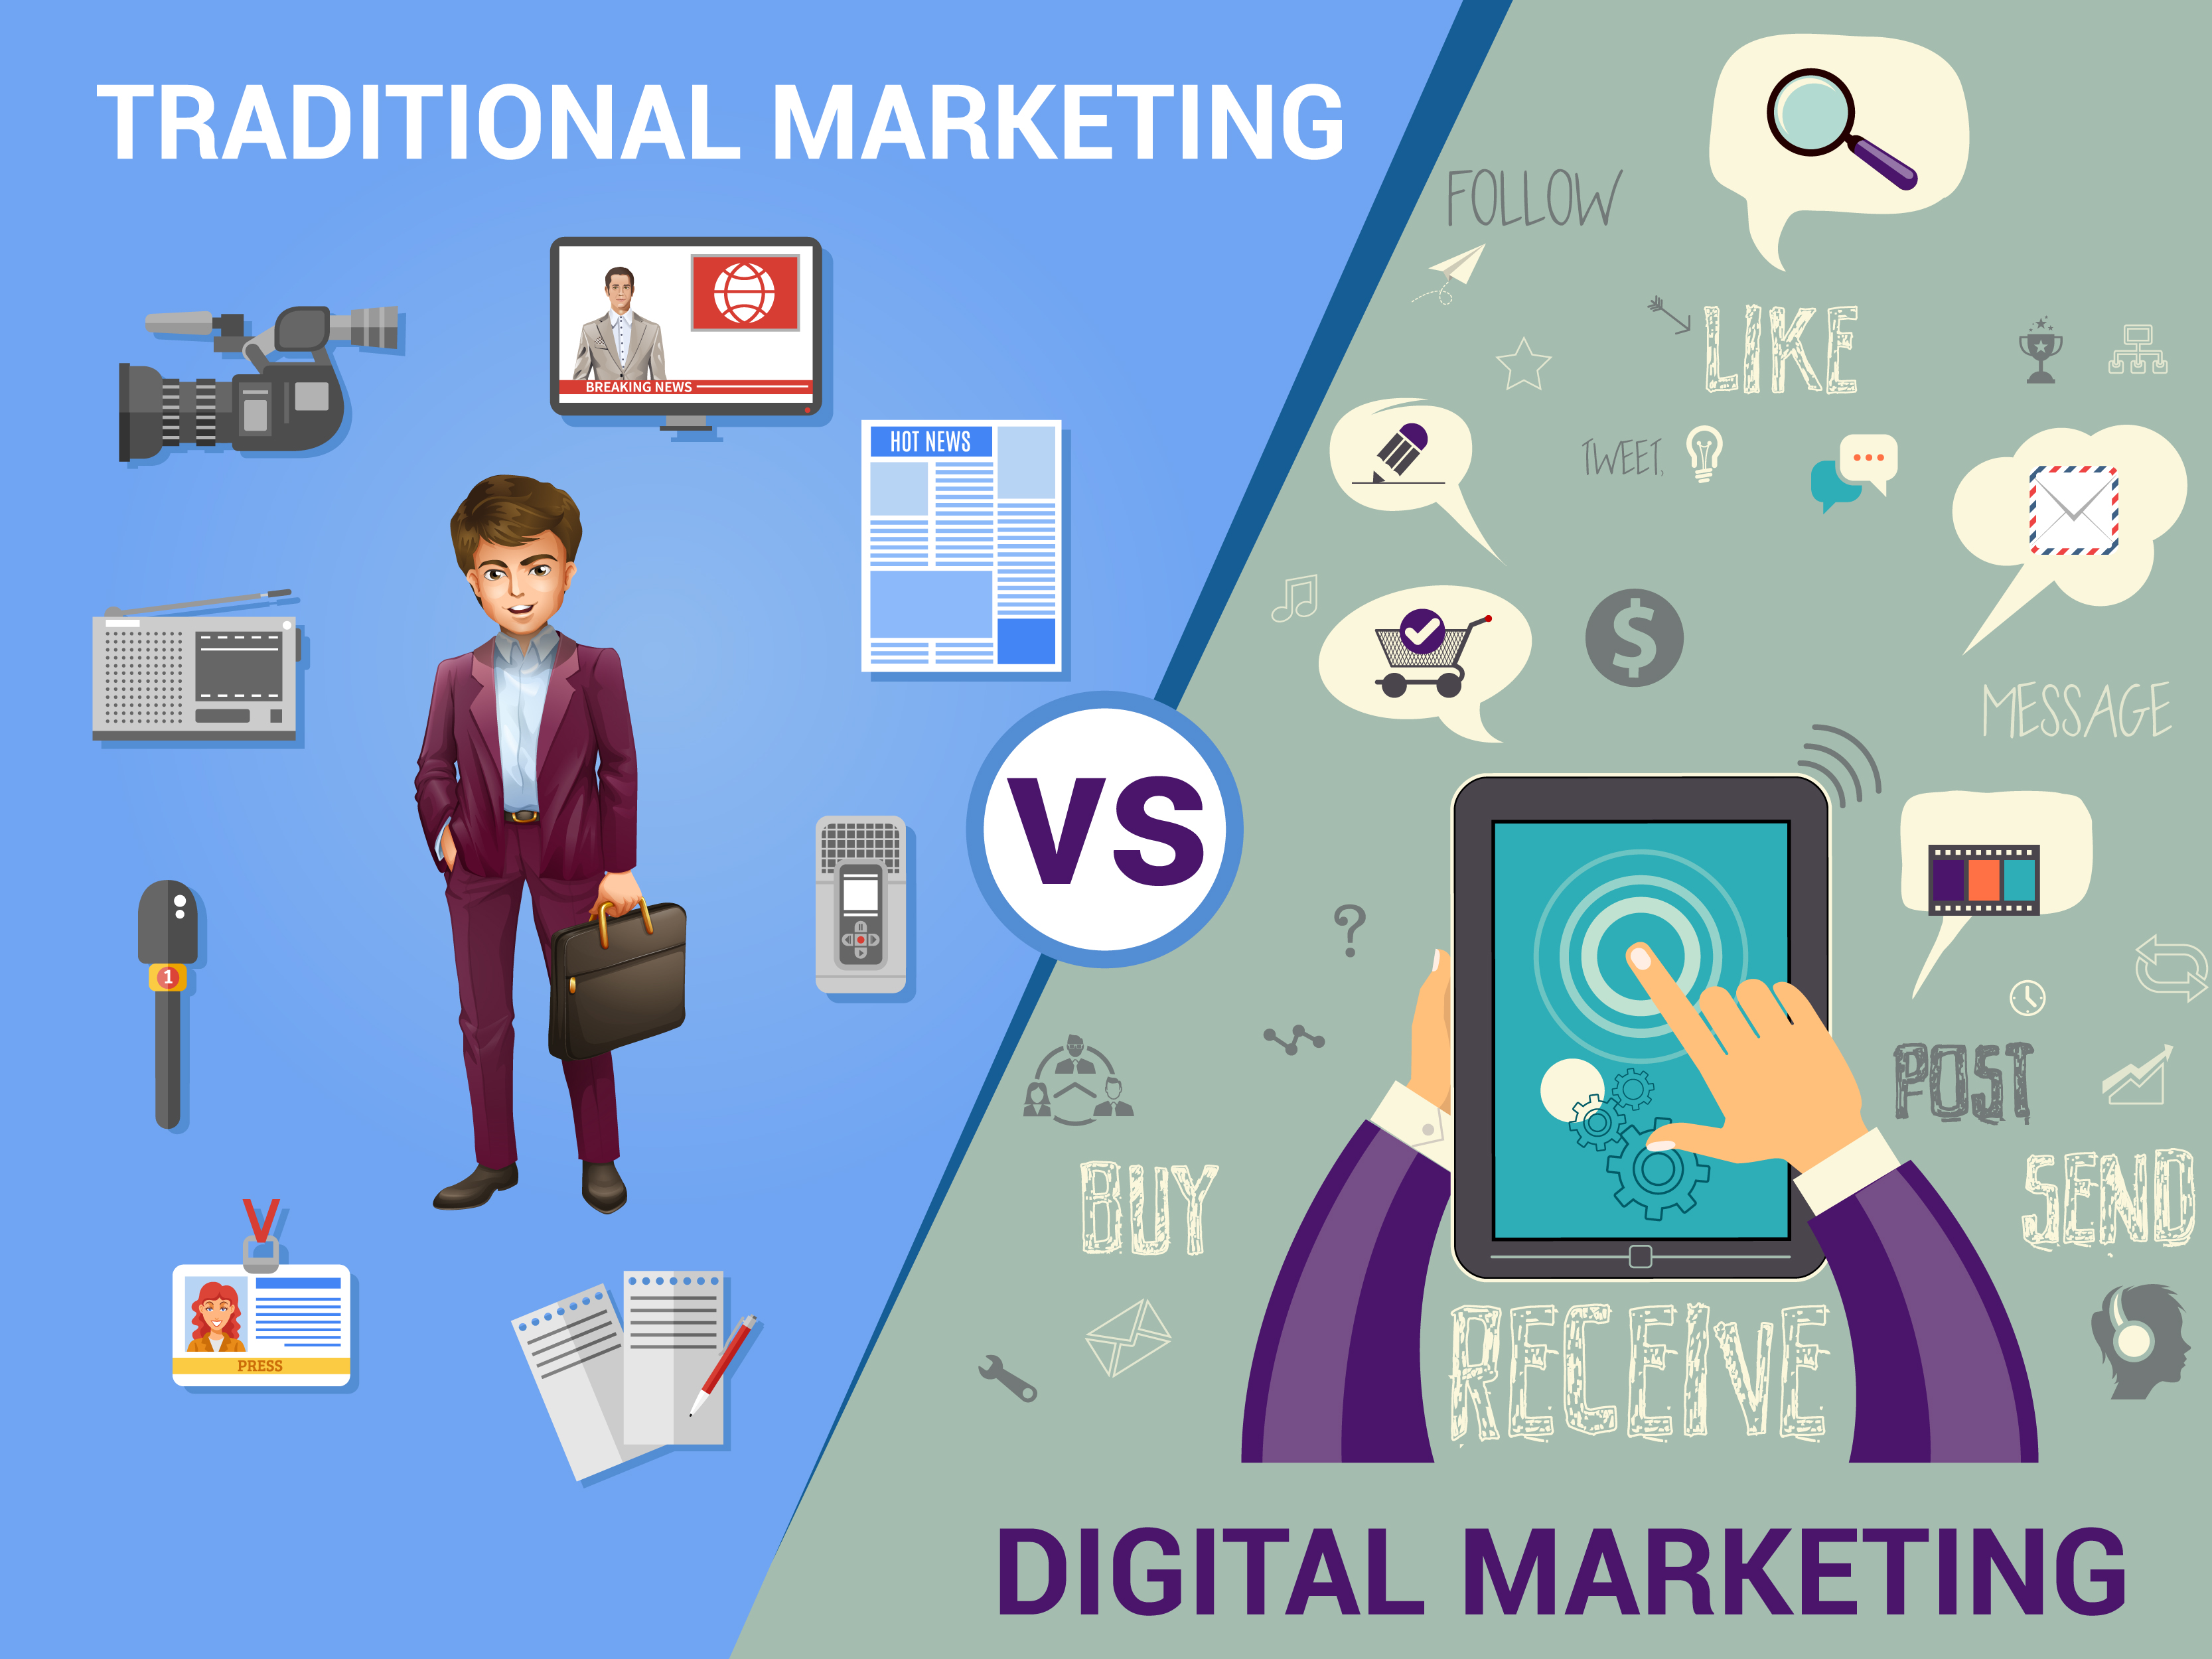 How Digital Marketing Is More Efficient Than Traditional Marketing?